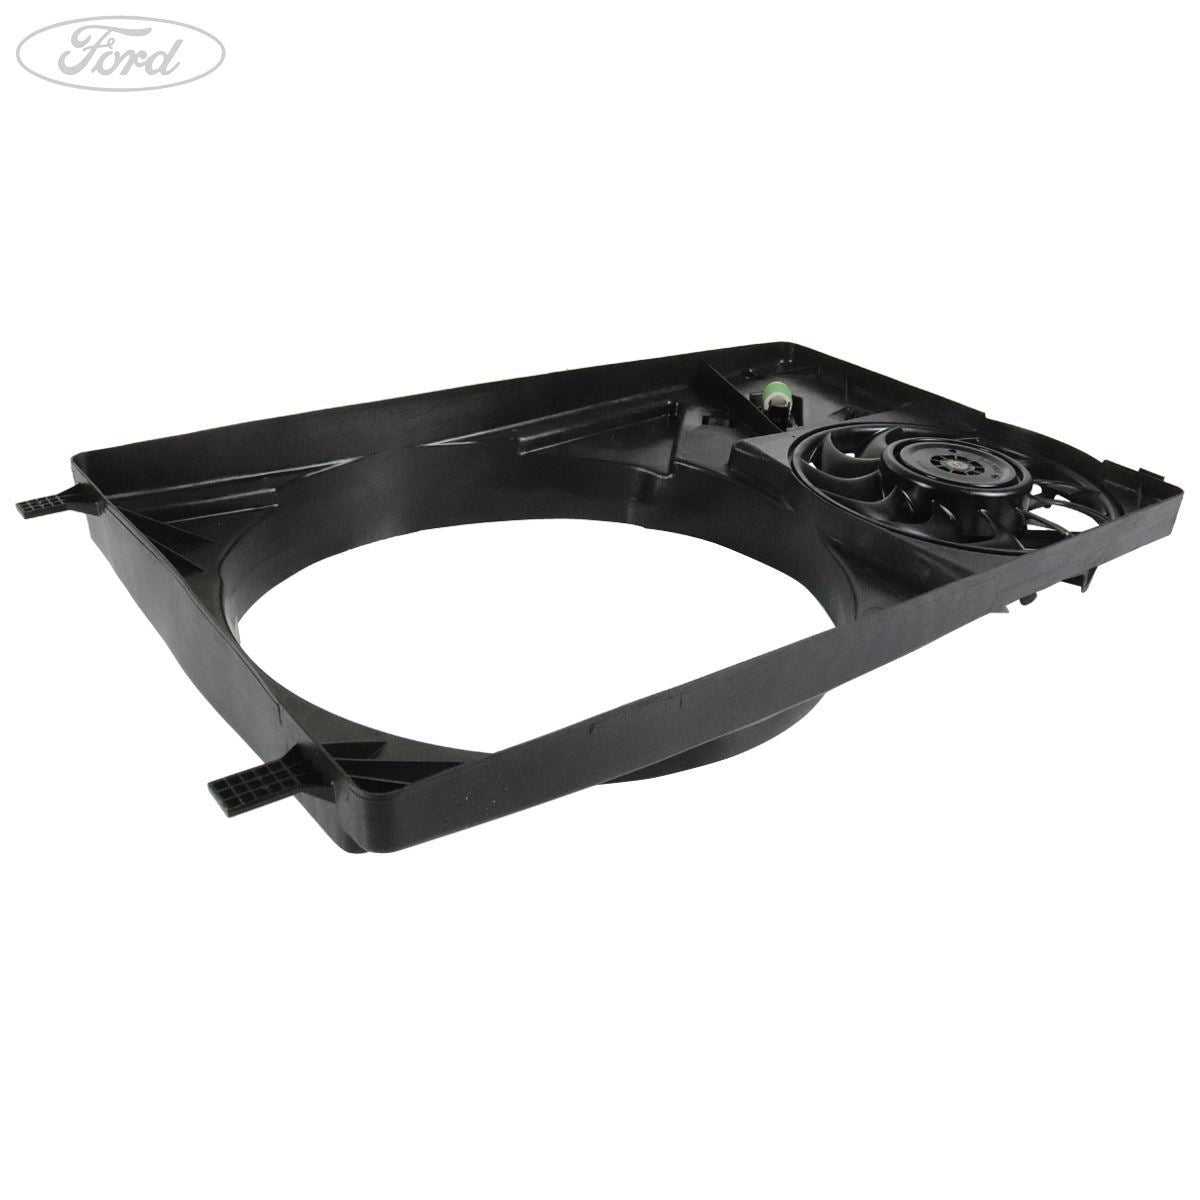 Ford, TRANSIT RADIATOR COWLING WITH SMALL FAN 4WD RWD